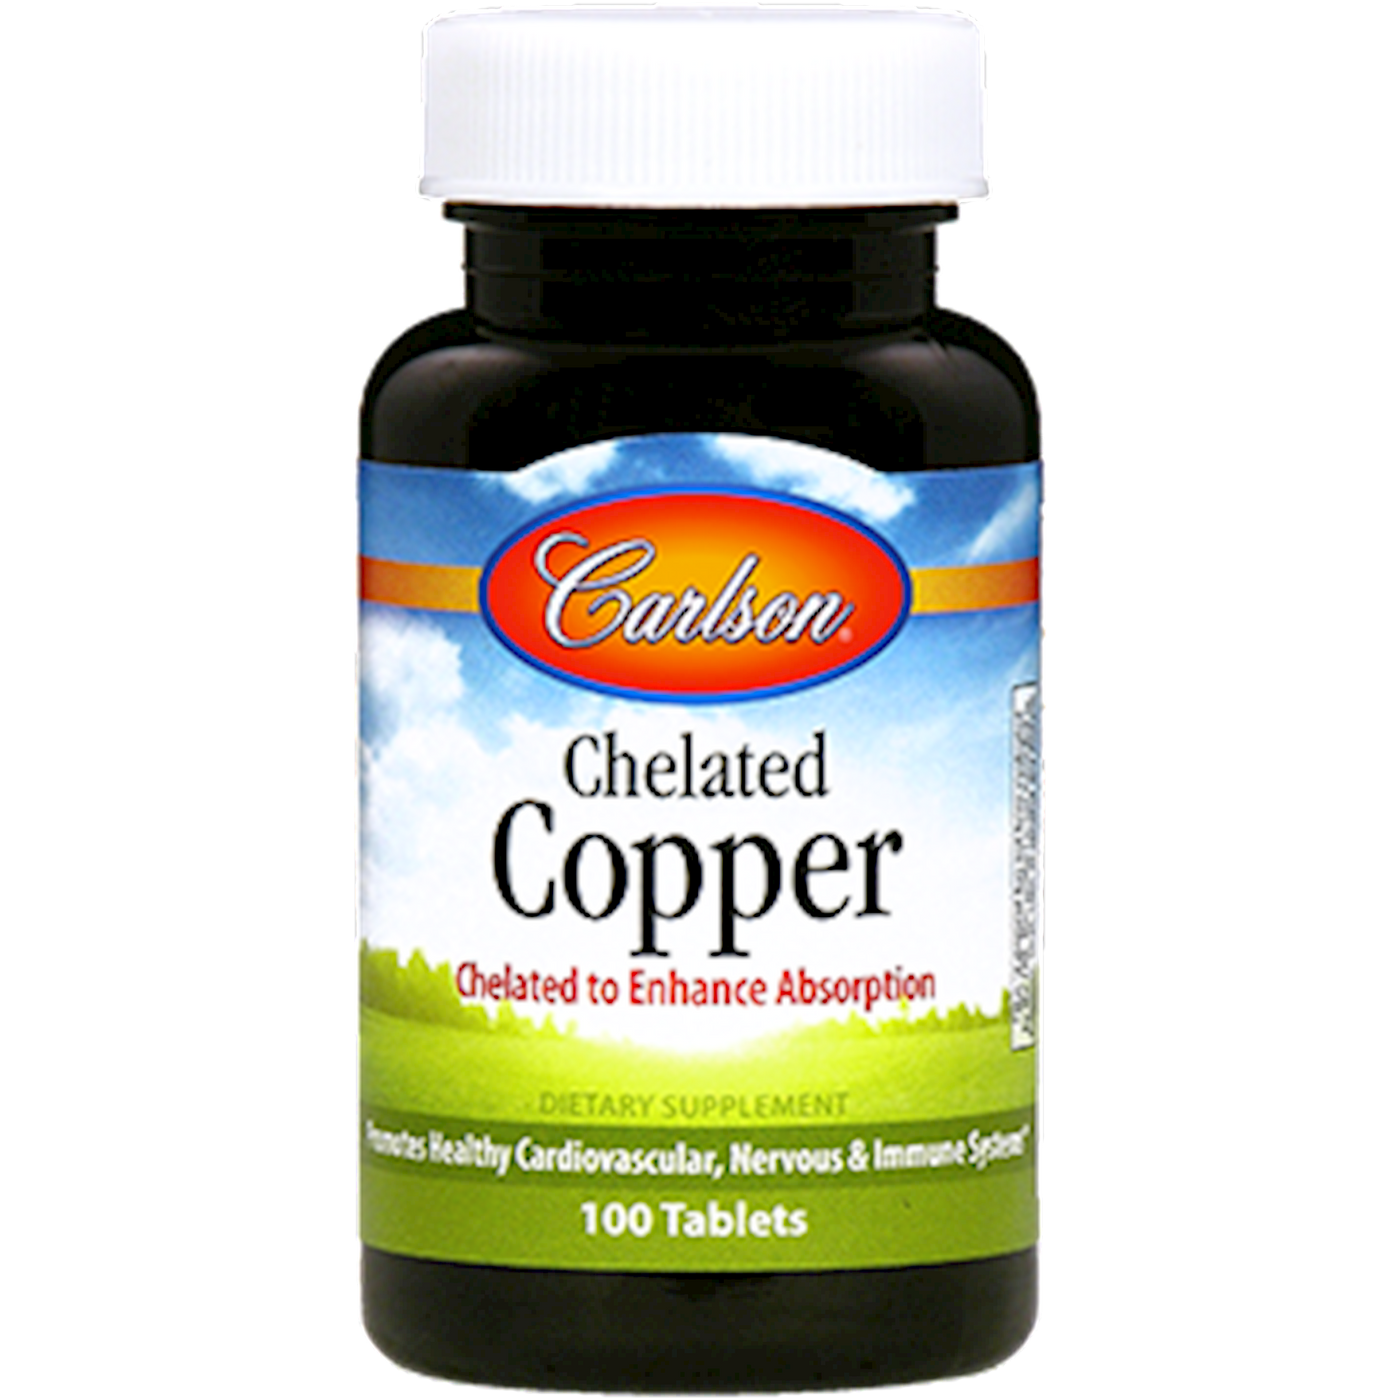 Chelated Copper 5 mg  Curated Wellness